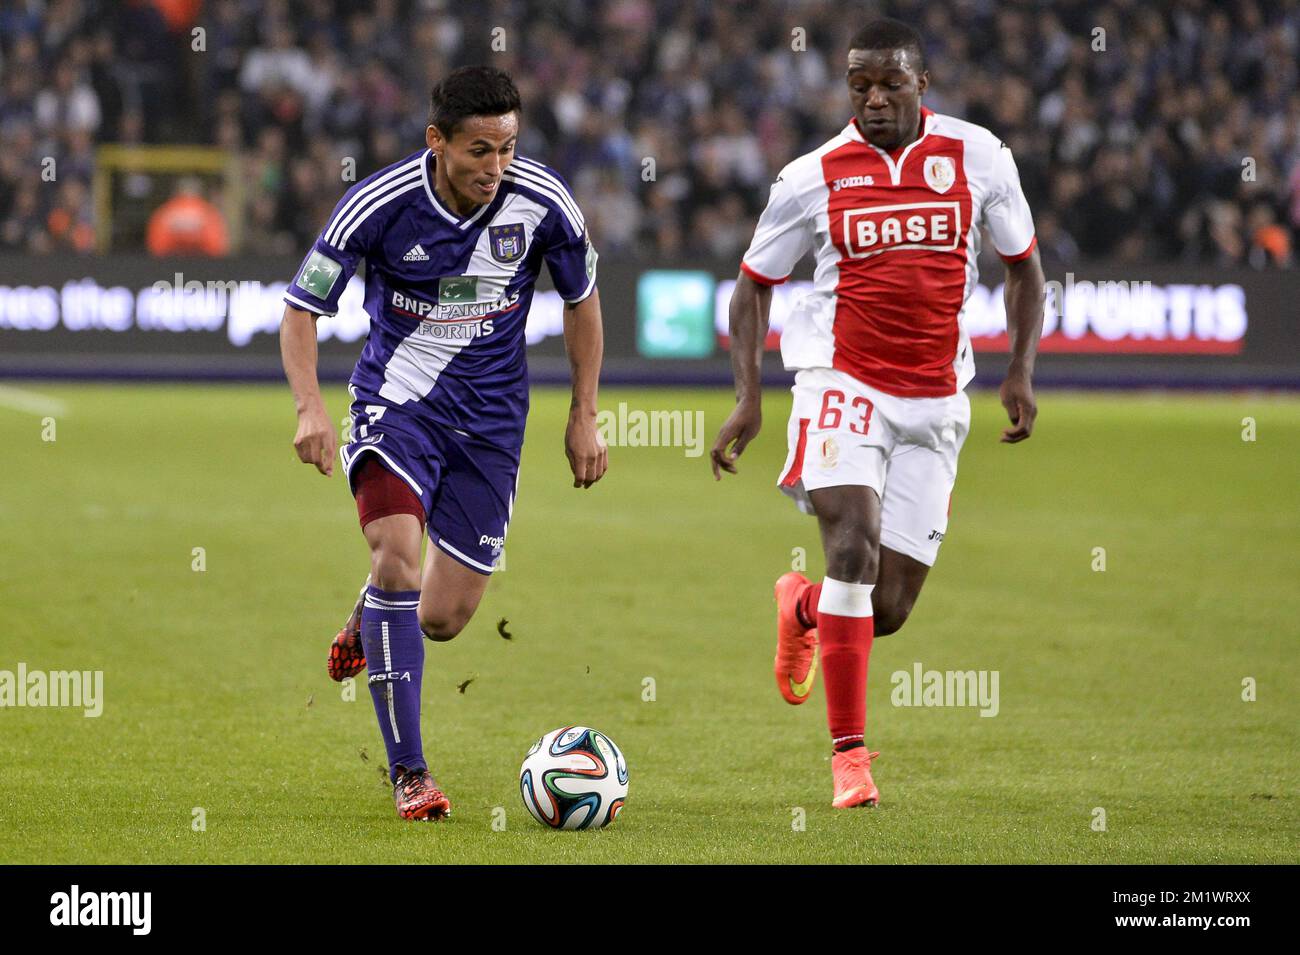 20141026 - BRUSSELS, BELGIUM: Anderlecht's Andy Najar and Standard's Geoffrey Mujangi Bia pictured during the Jupiler Pro League match between RSC Anderlecht and Standard de Liege, in Brussels, Sunday 26 October 2014, on day 12 of the Belgian soccer championship. BELGA PHOTO NICOLAS LAMBERT Stock Photo